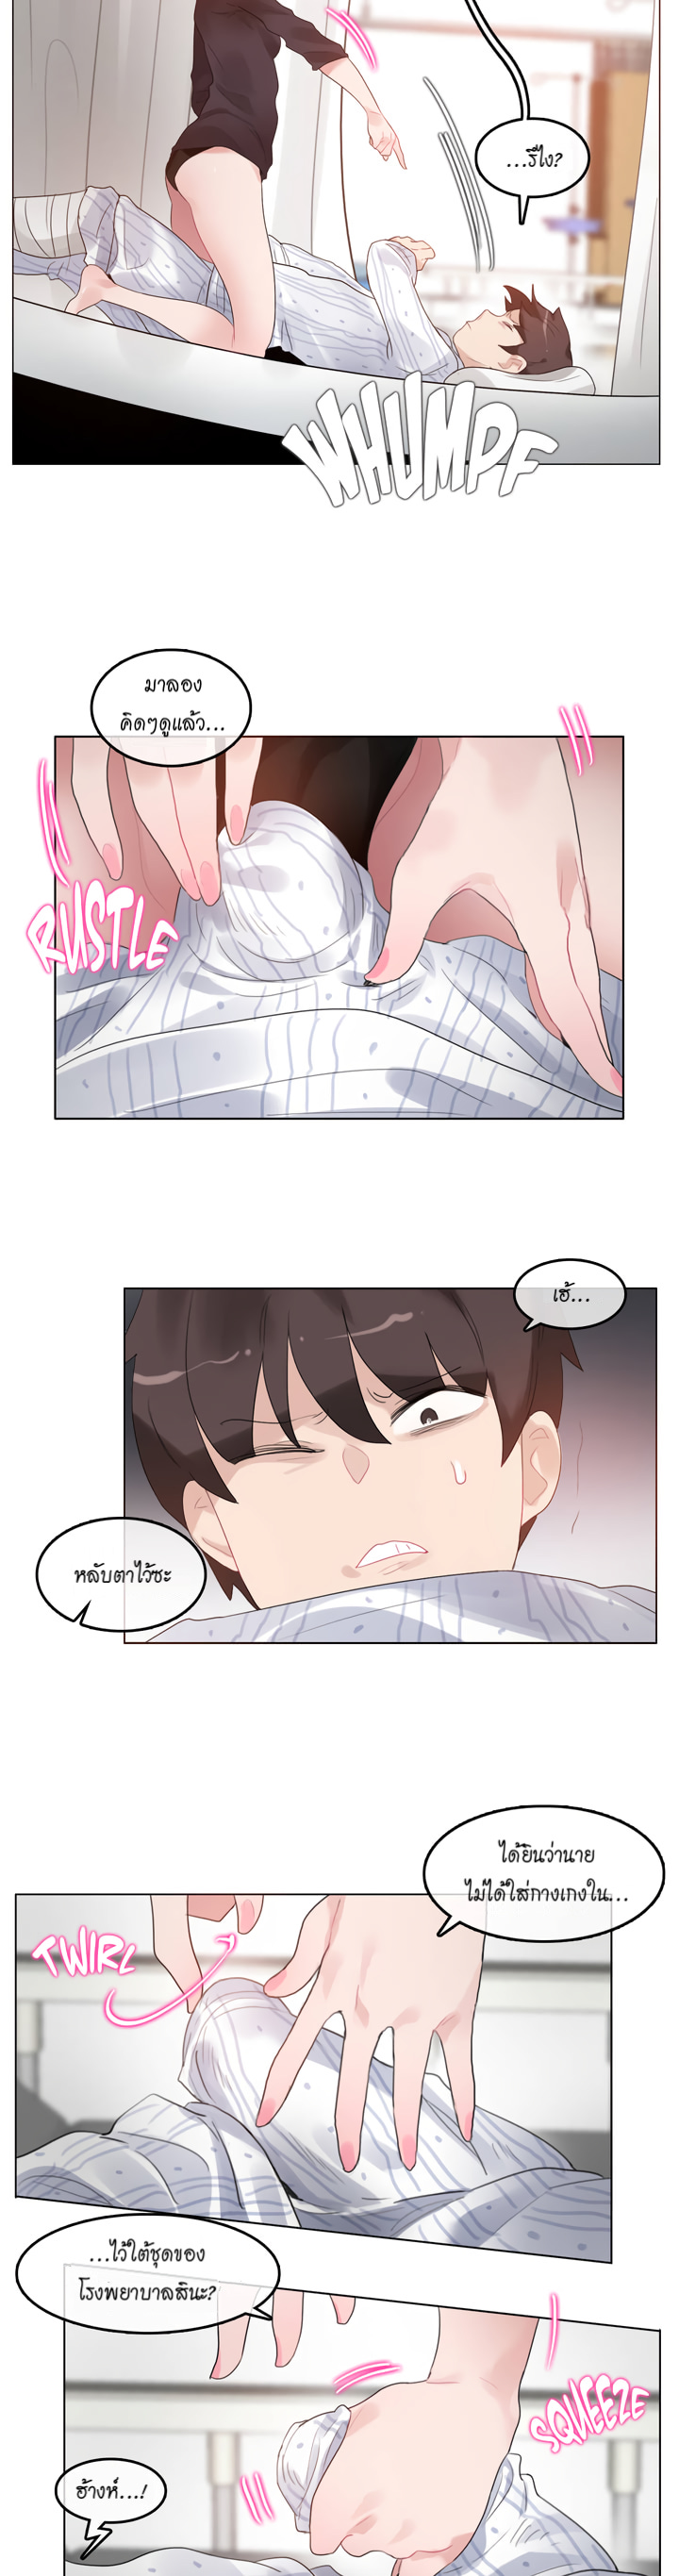 A Pervert’s Daily Life51 (3)